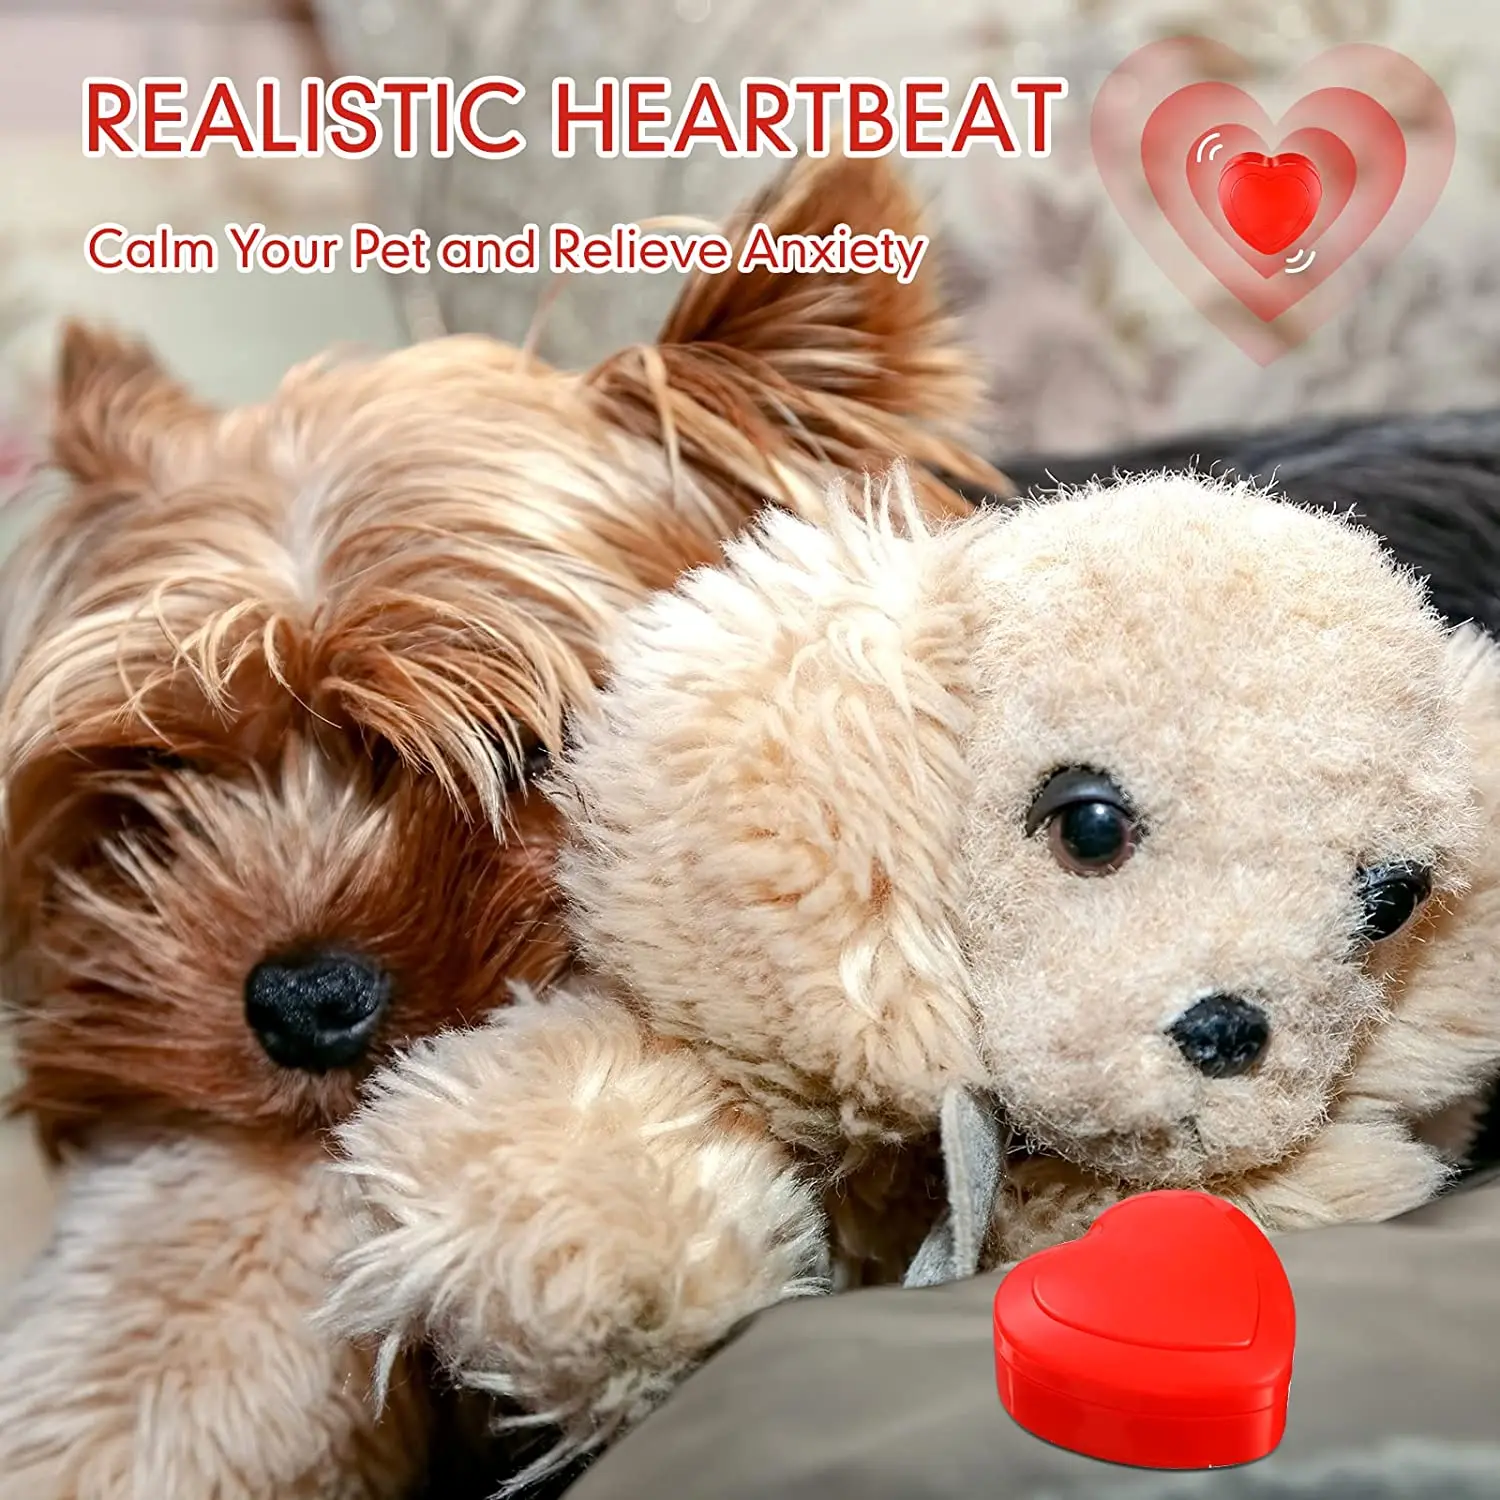 https://ae01.alicdn.com/kf/Sc6131ec5132f433bad0557f9d1ea2300g/Heartbeat-Simulator-Heartbeat-Puppy-Dog-Heartbeat-Toy-Cat-Sleep-Aid-Replacement-Heartbeat-for-Pet-Anxiety-Relief.jpg